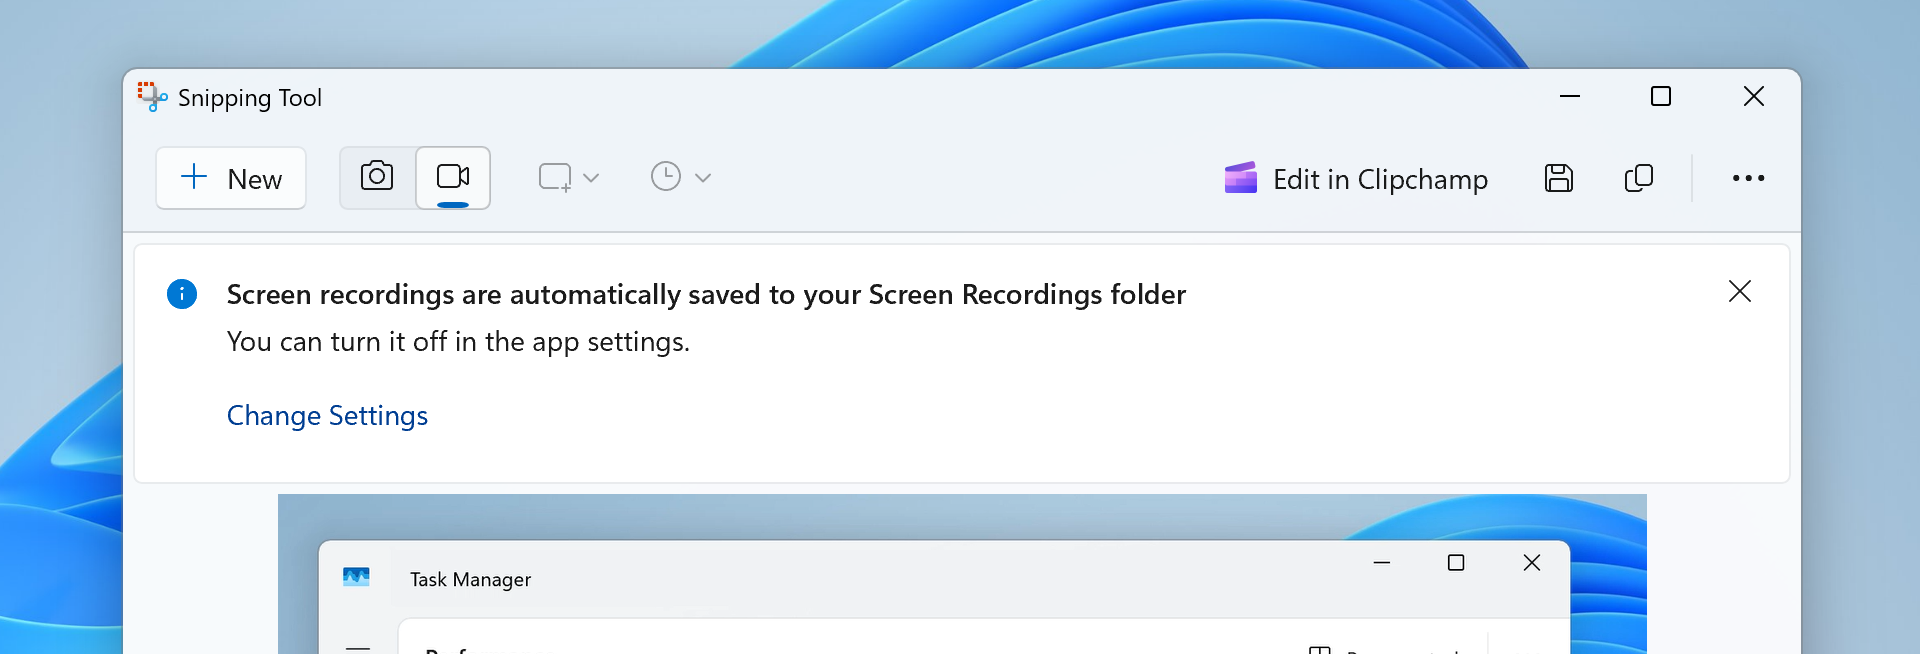 Snipping Tool showing new banner for screen recordings now automatically being saved to your Screen Recordings folder